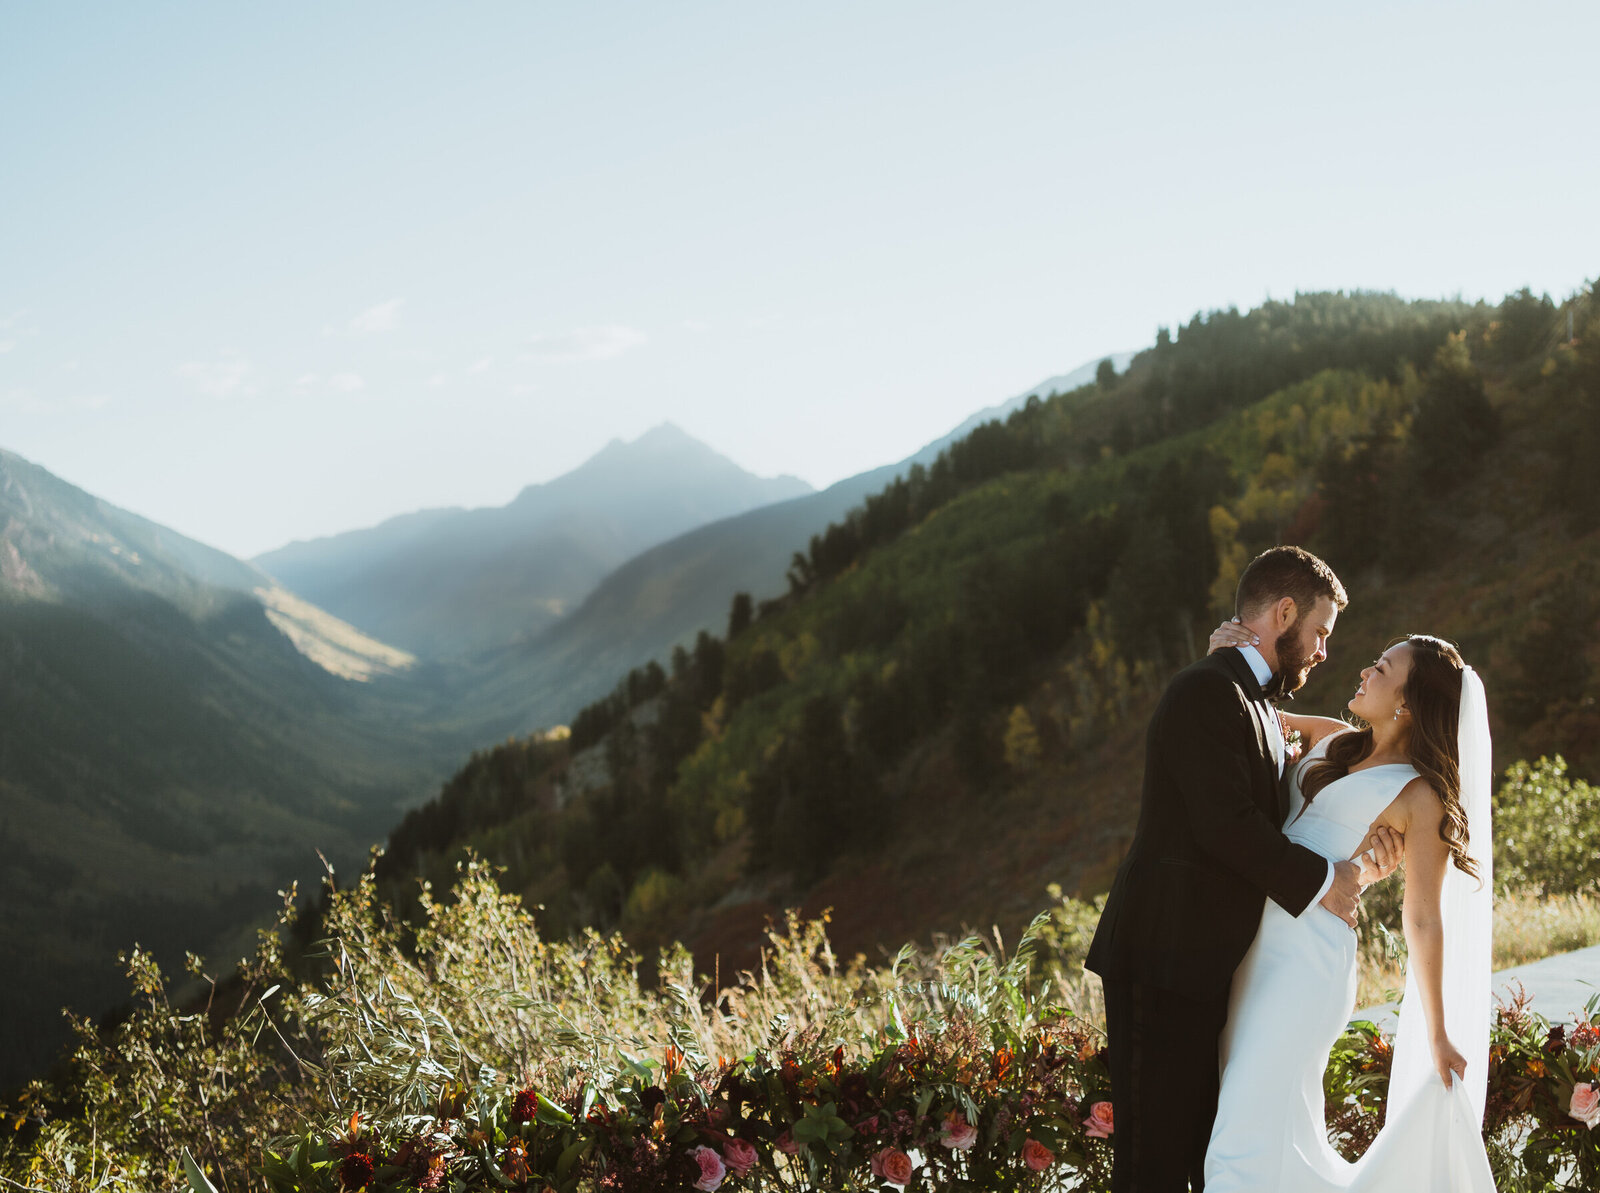 the bride is getting dipped by the groom. they are smiling at each other with a  peak in aspen in the backdrop along with a large canyon. the bride is wearing a veil, and the groom is wearing a black tux.